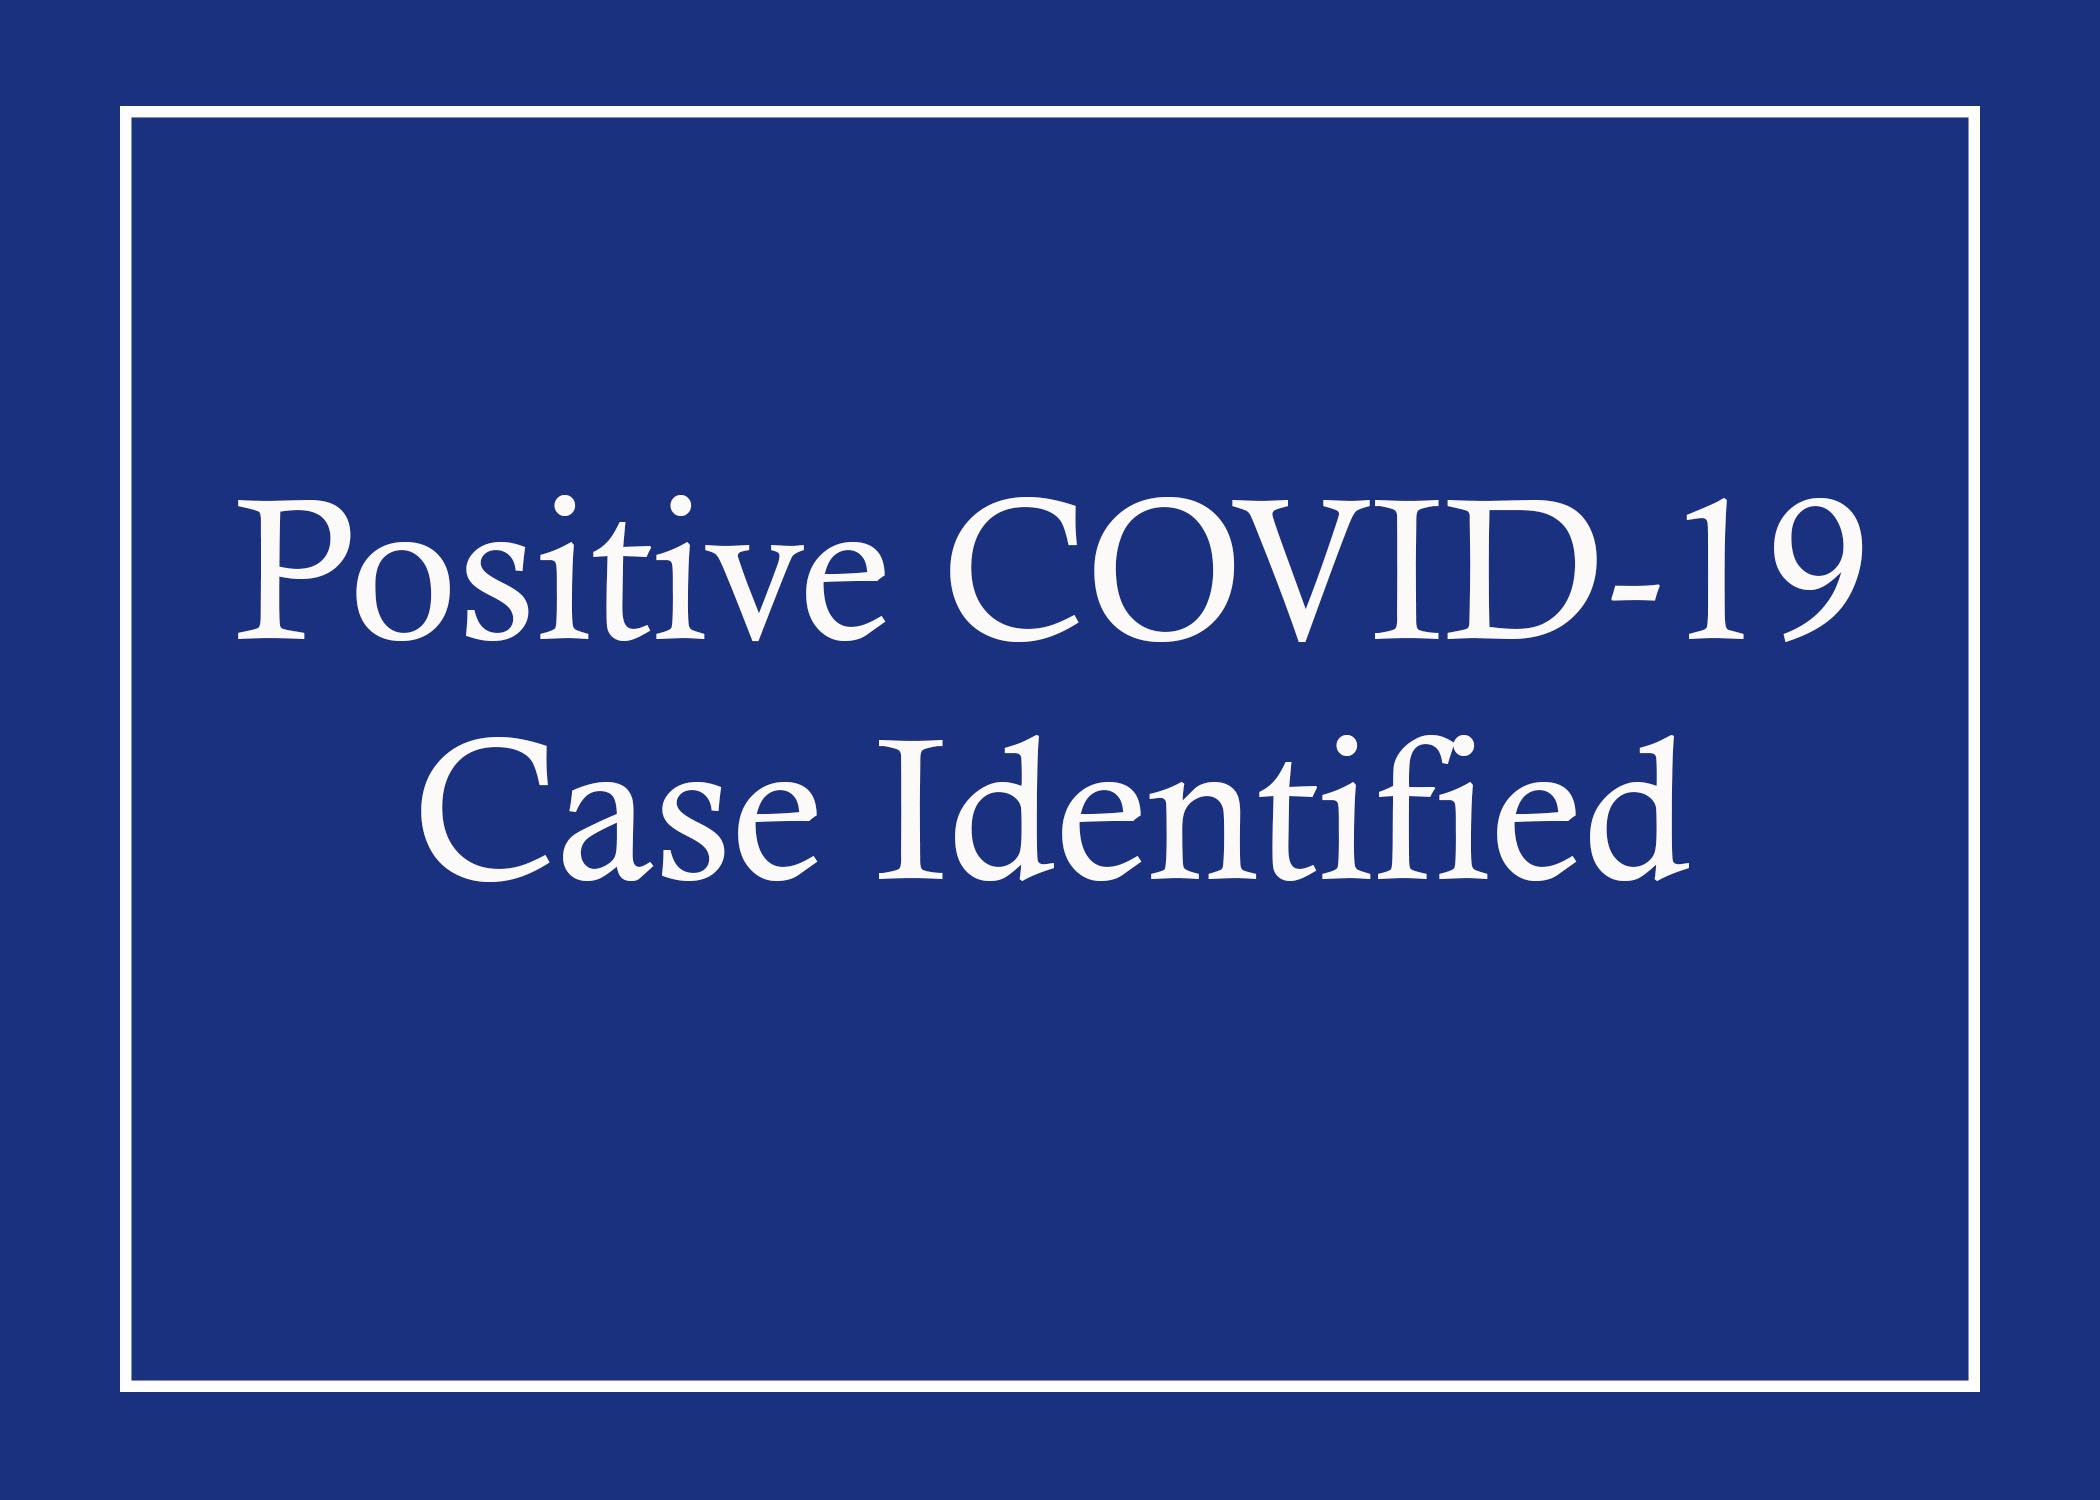 Confirmed COVID-19 case at  Wichita Work Release Facility 